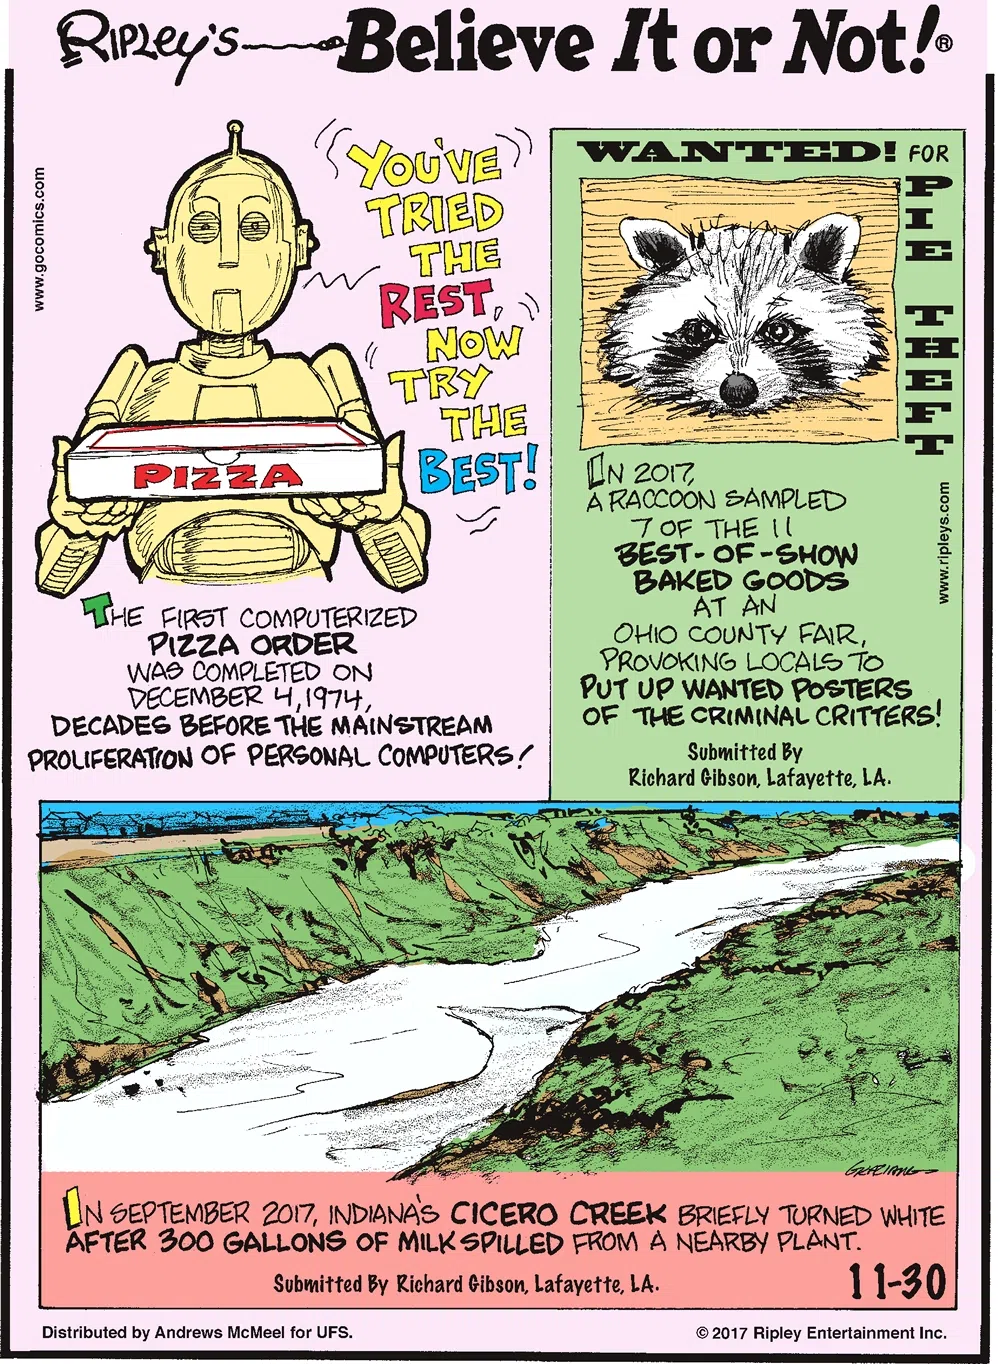 The first computerized pizza order was completed on December 4, 1974, decades before the mainstream proliferation of personal computers!--------------------- In 2017, a raccoon sampled 7 of the 11 best-of-show baked goods at an Ohio County Fair, provoking locals to put up wanted posters of the criminal critters! Submitted by Richard Gibson, Lafayette, LA.-------------------- In September 2017, Indiana's Cicero Creek briefly turned white after 300 gallons of milk spilled from a nearby plant. Submitted by Richard Gibson, Lafayette, LA.